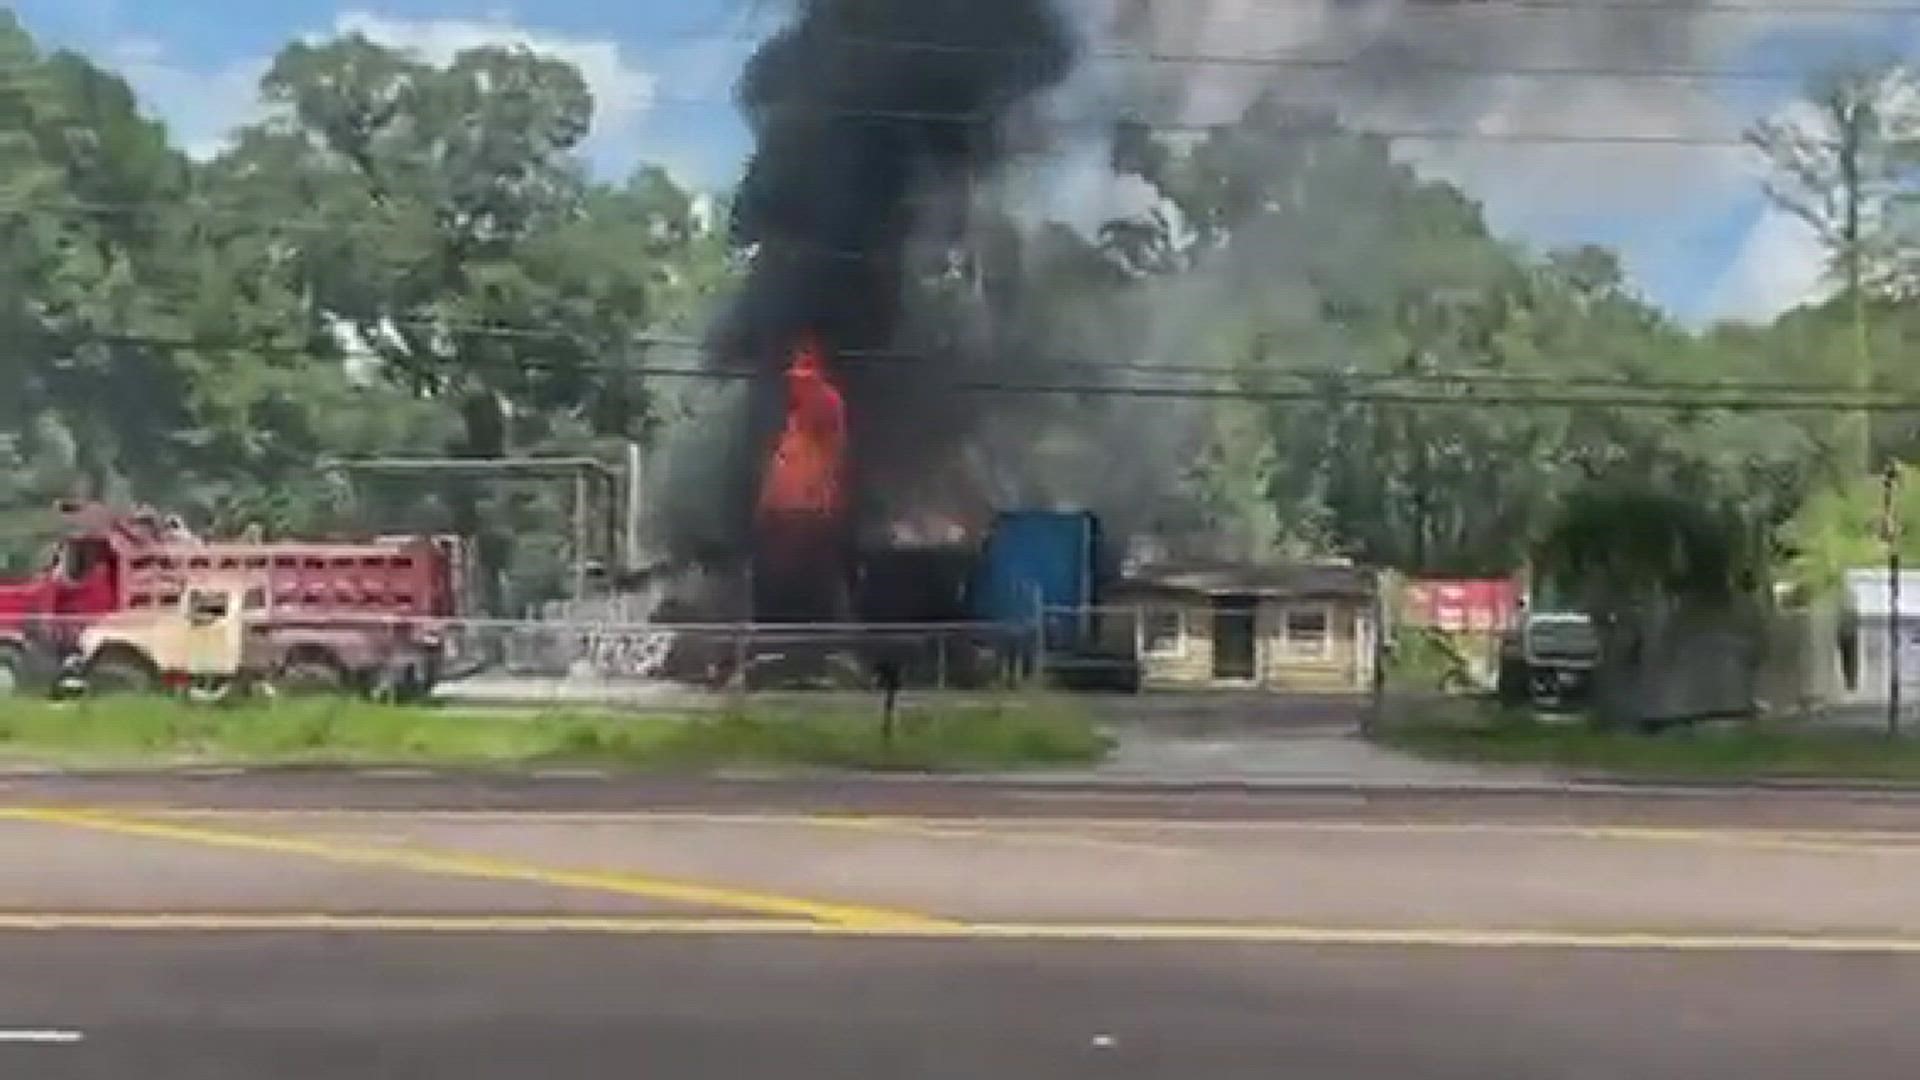 This auto parts shop in Jacksonville and a truck parked outside were engulfed in flames Saturday. No one was hurt and the fire was put out.
Credit: Josh